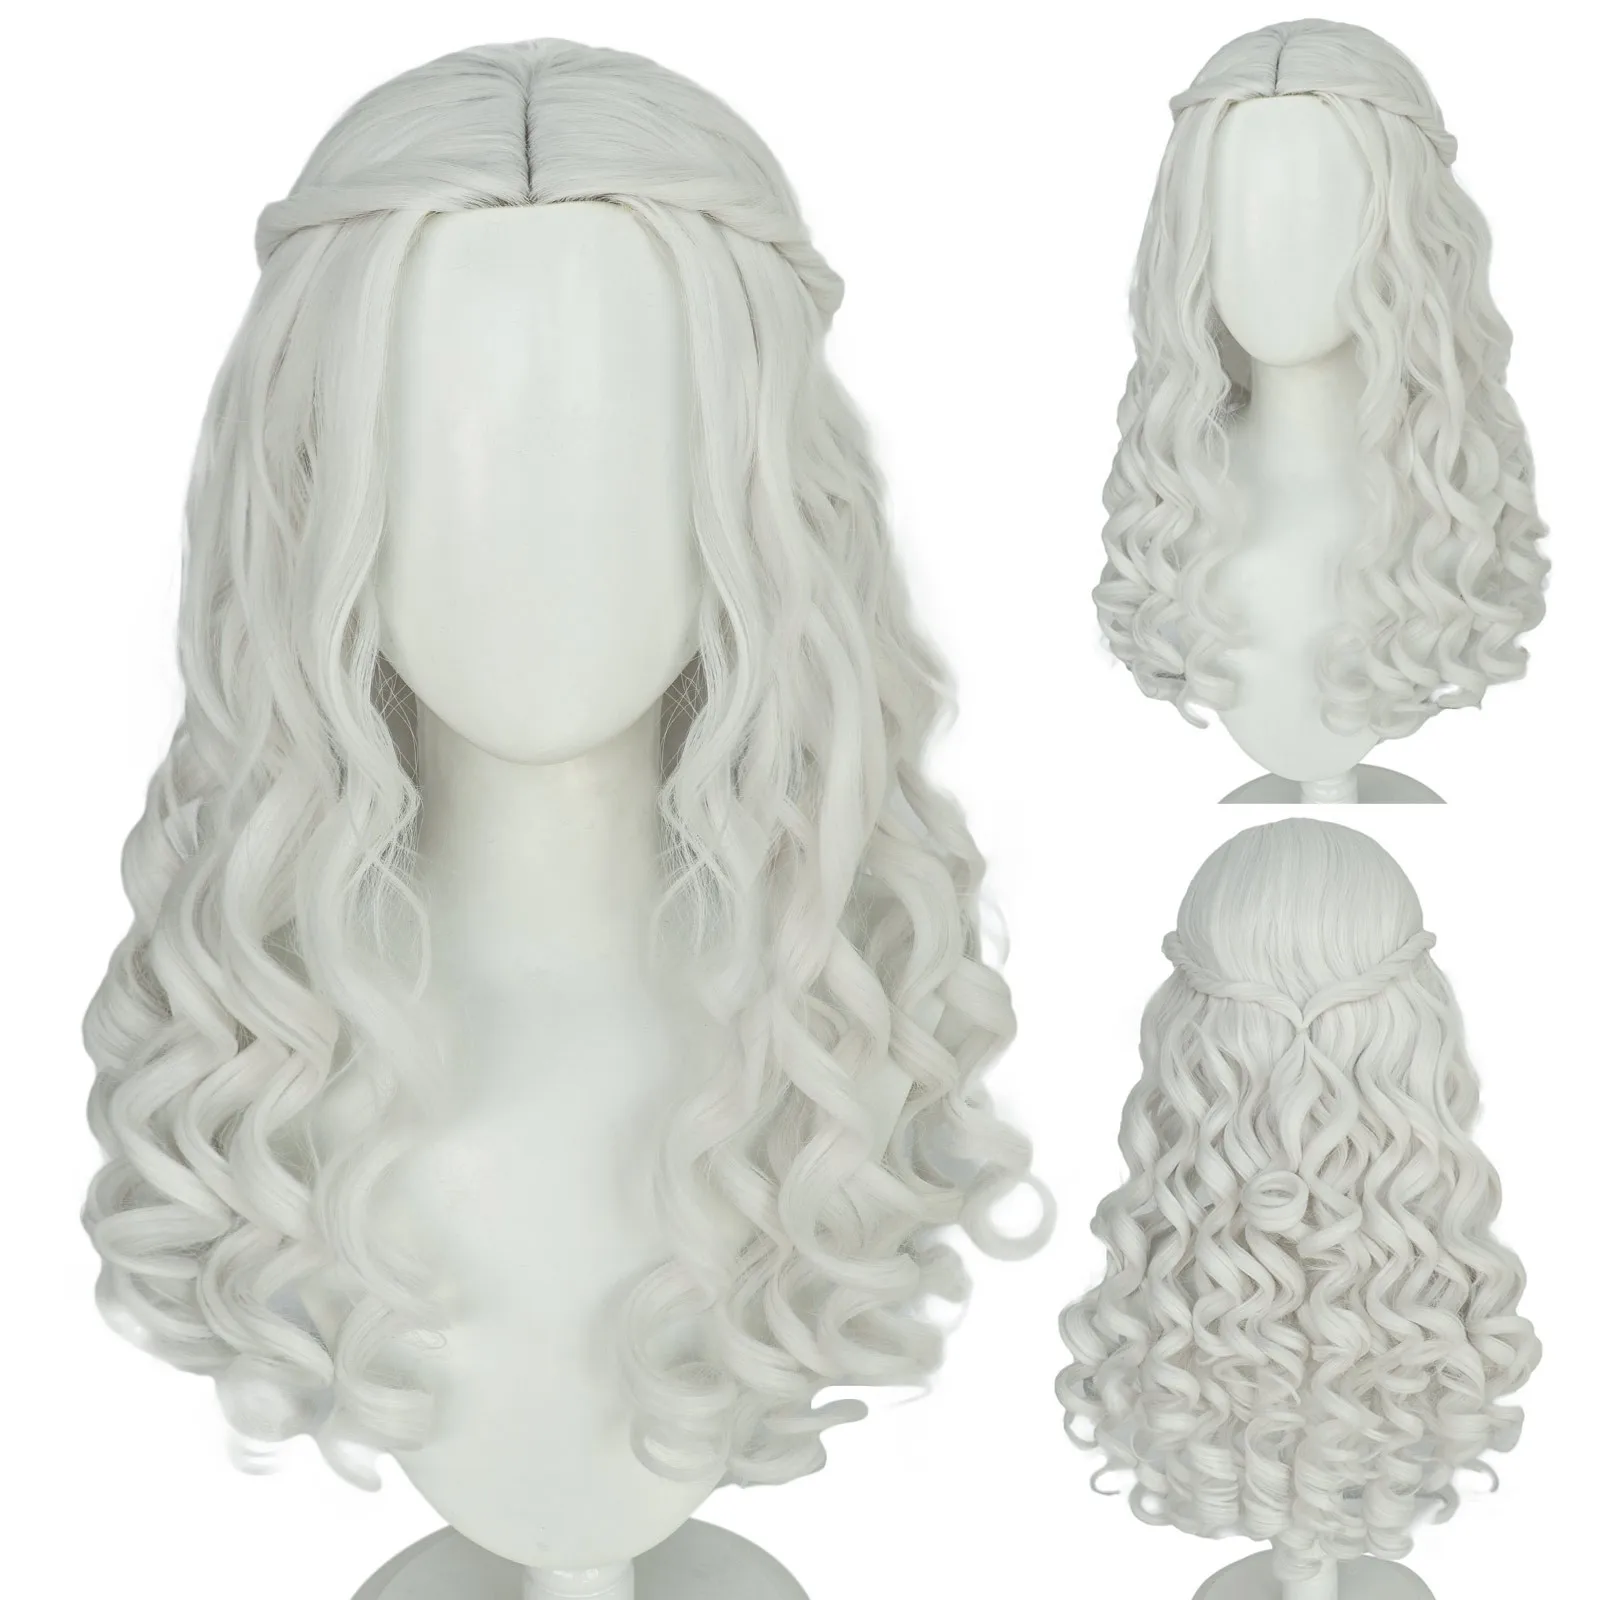 

White Queen Wig Cosplay Wig Movie Alice White Wavy Long Braid Hair Machine Made for Halloween Accessories Party Queen Hair Wig